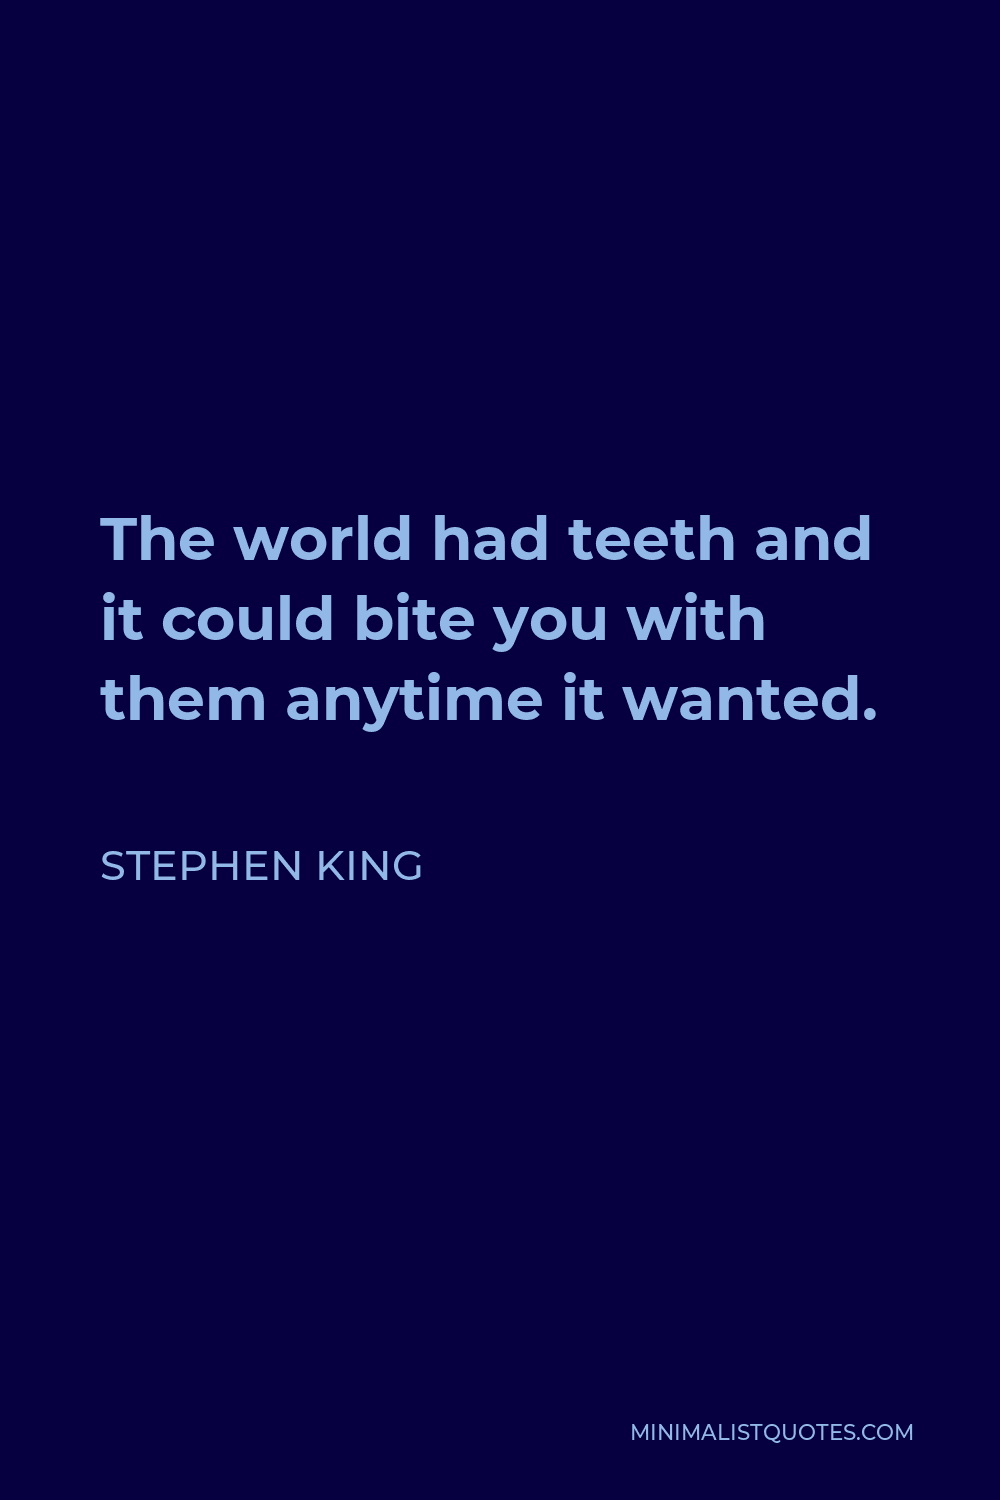 Stephen King Quote - The world had teeth and it could bite you with them anytime it wanted.